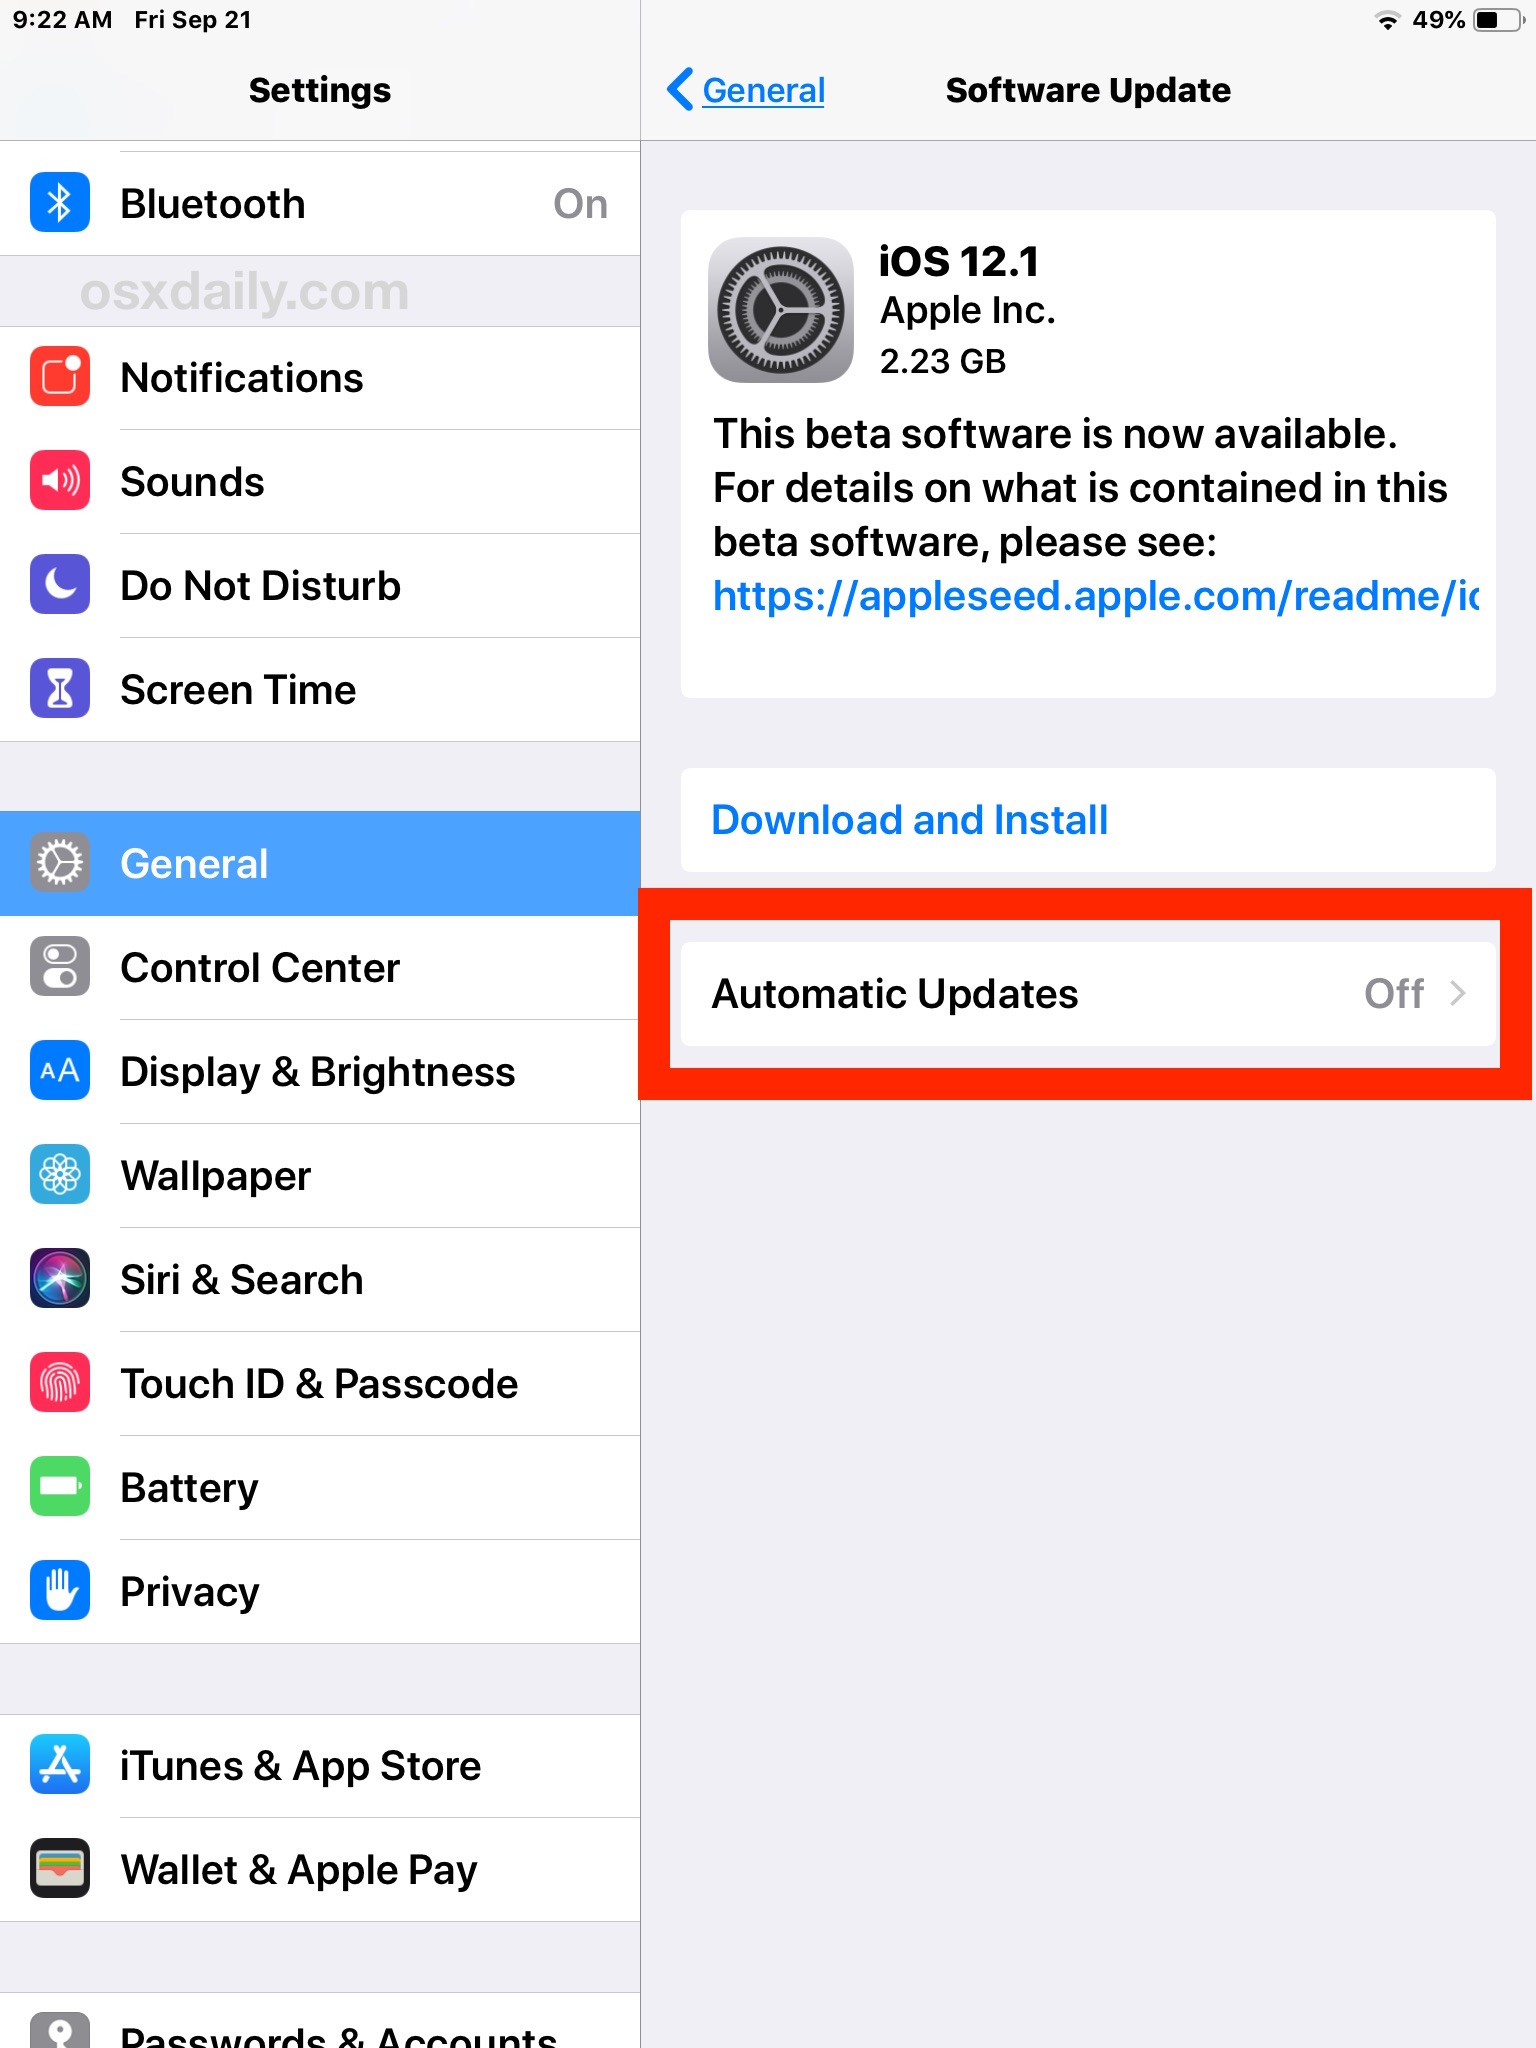 how to download software update on ipad